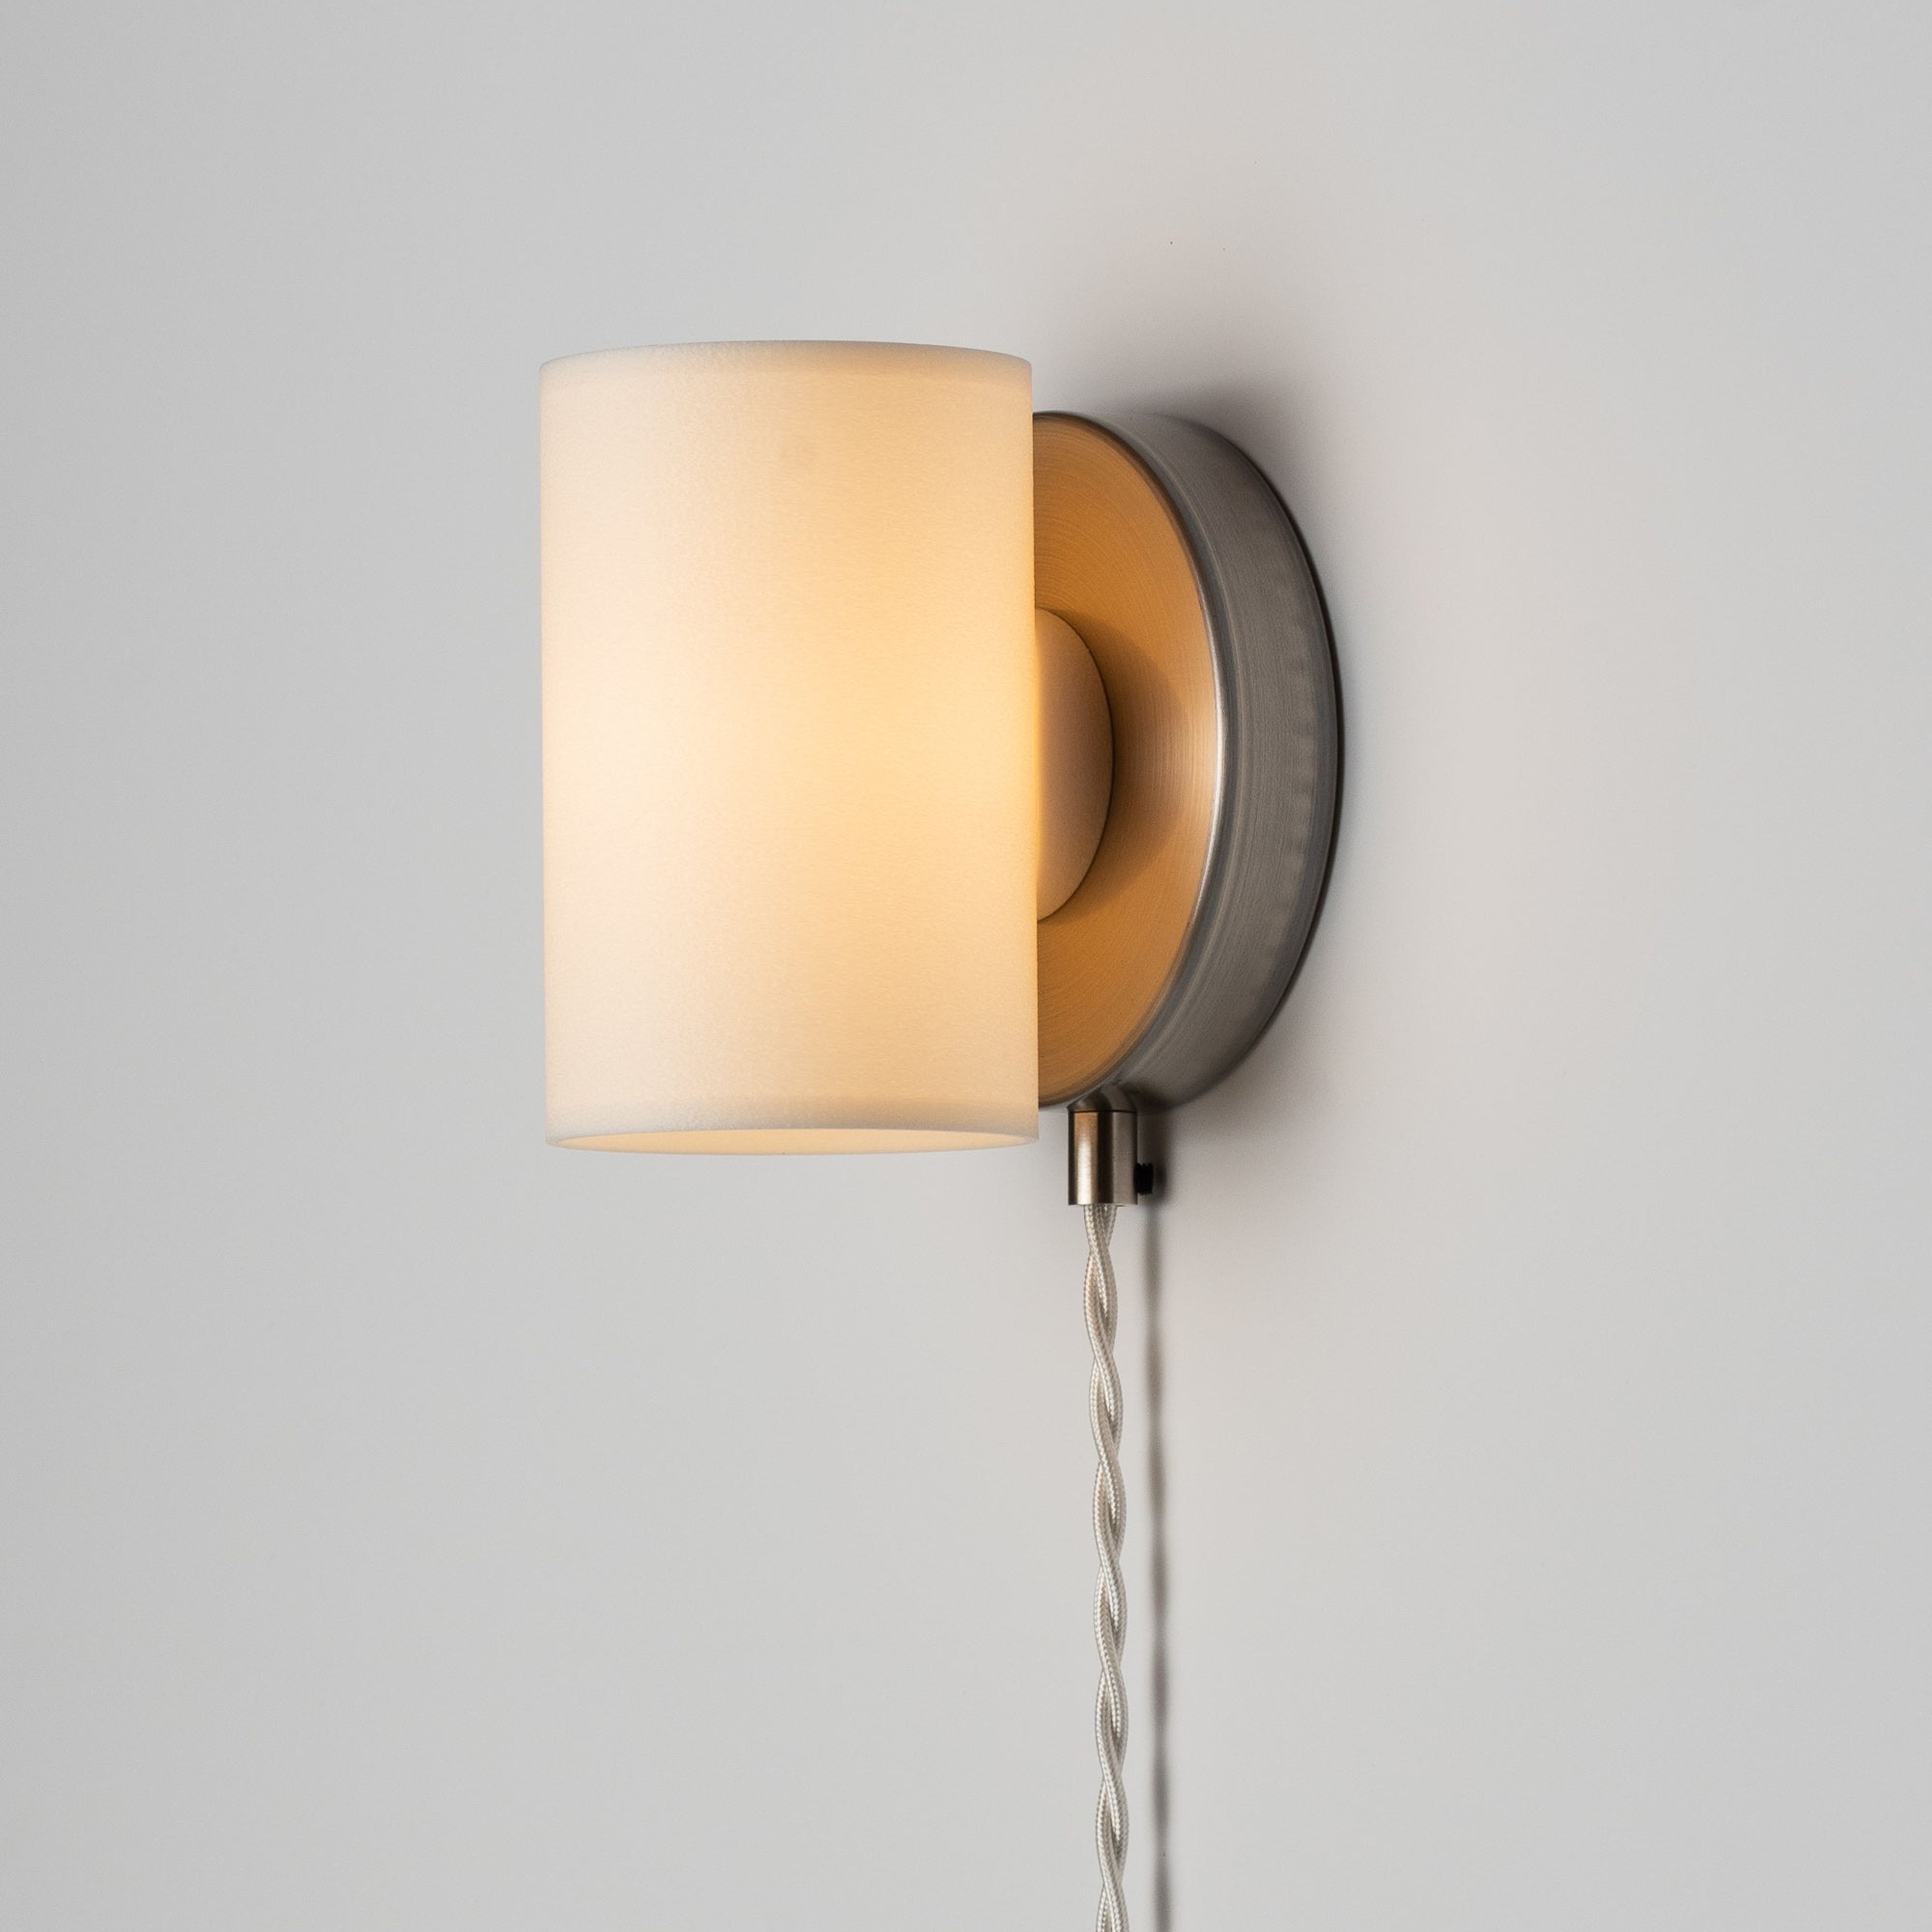 CY Sconce Wired Plug-in